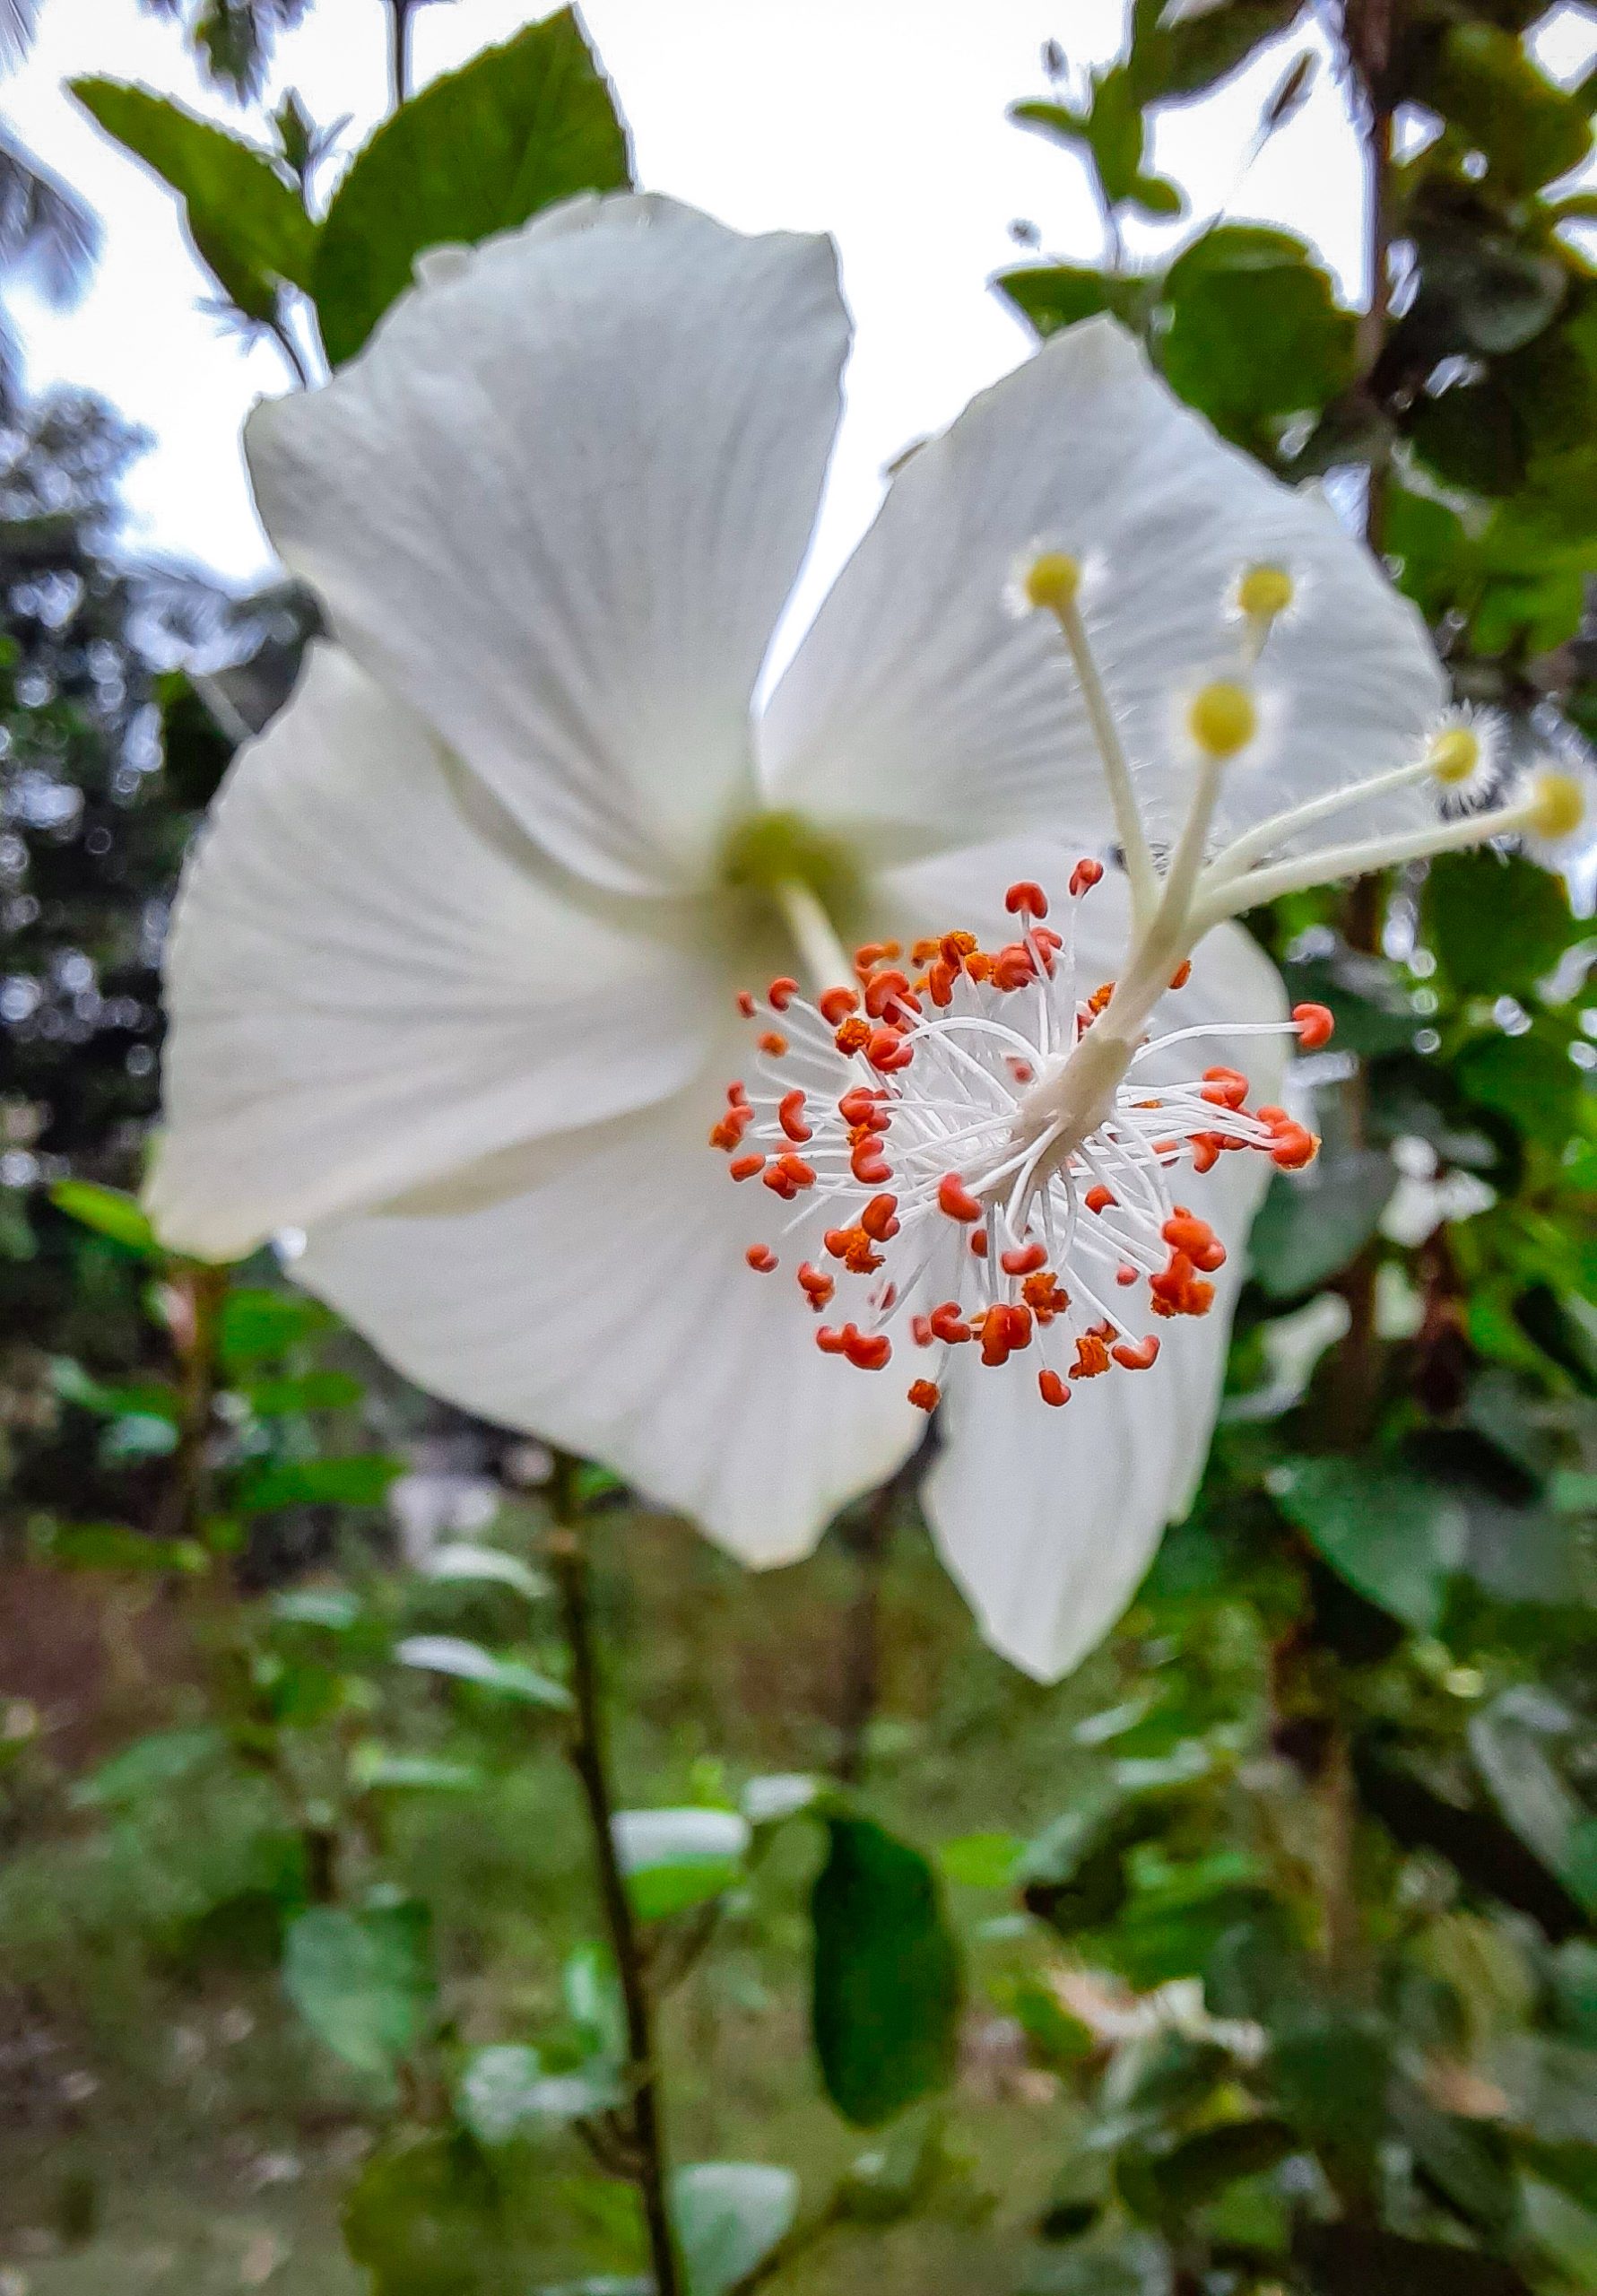 A white hibiscus flower